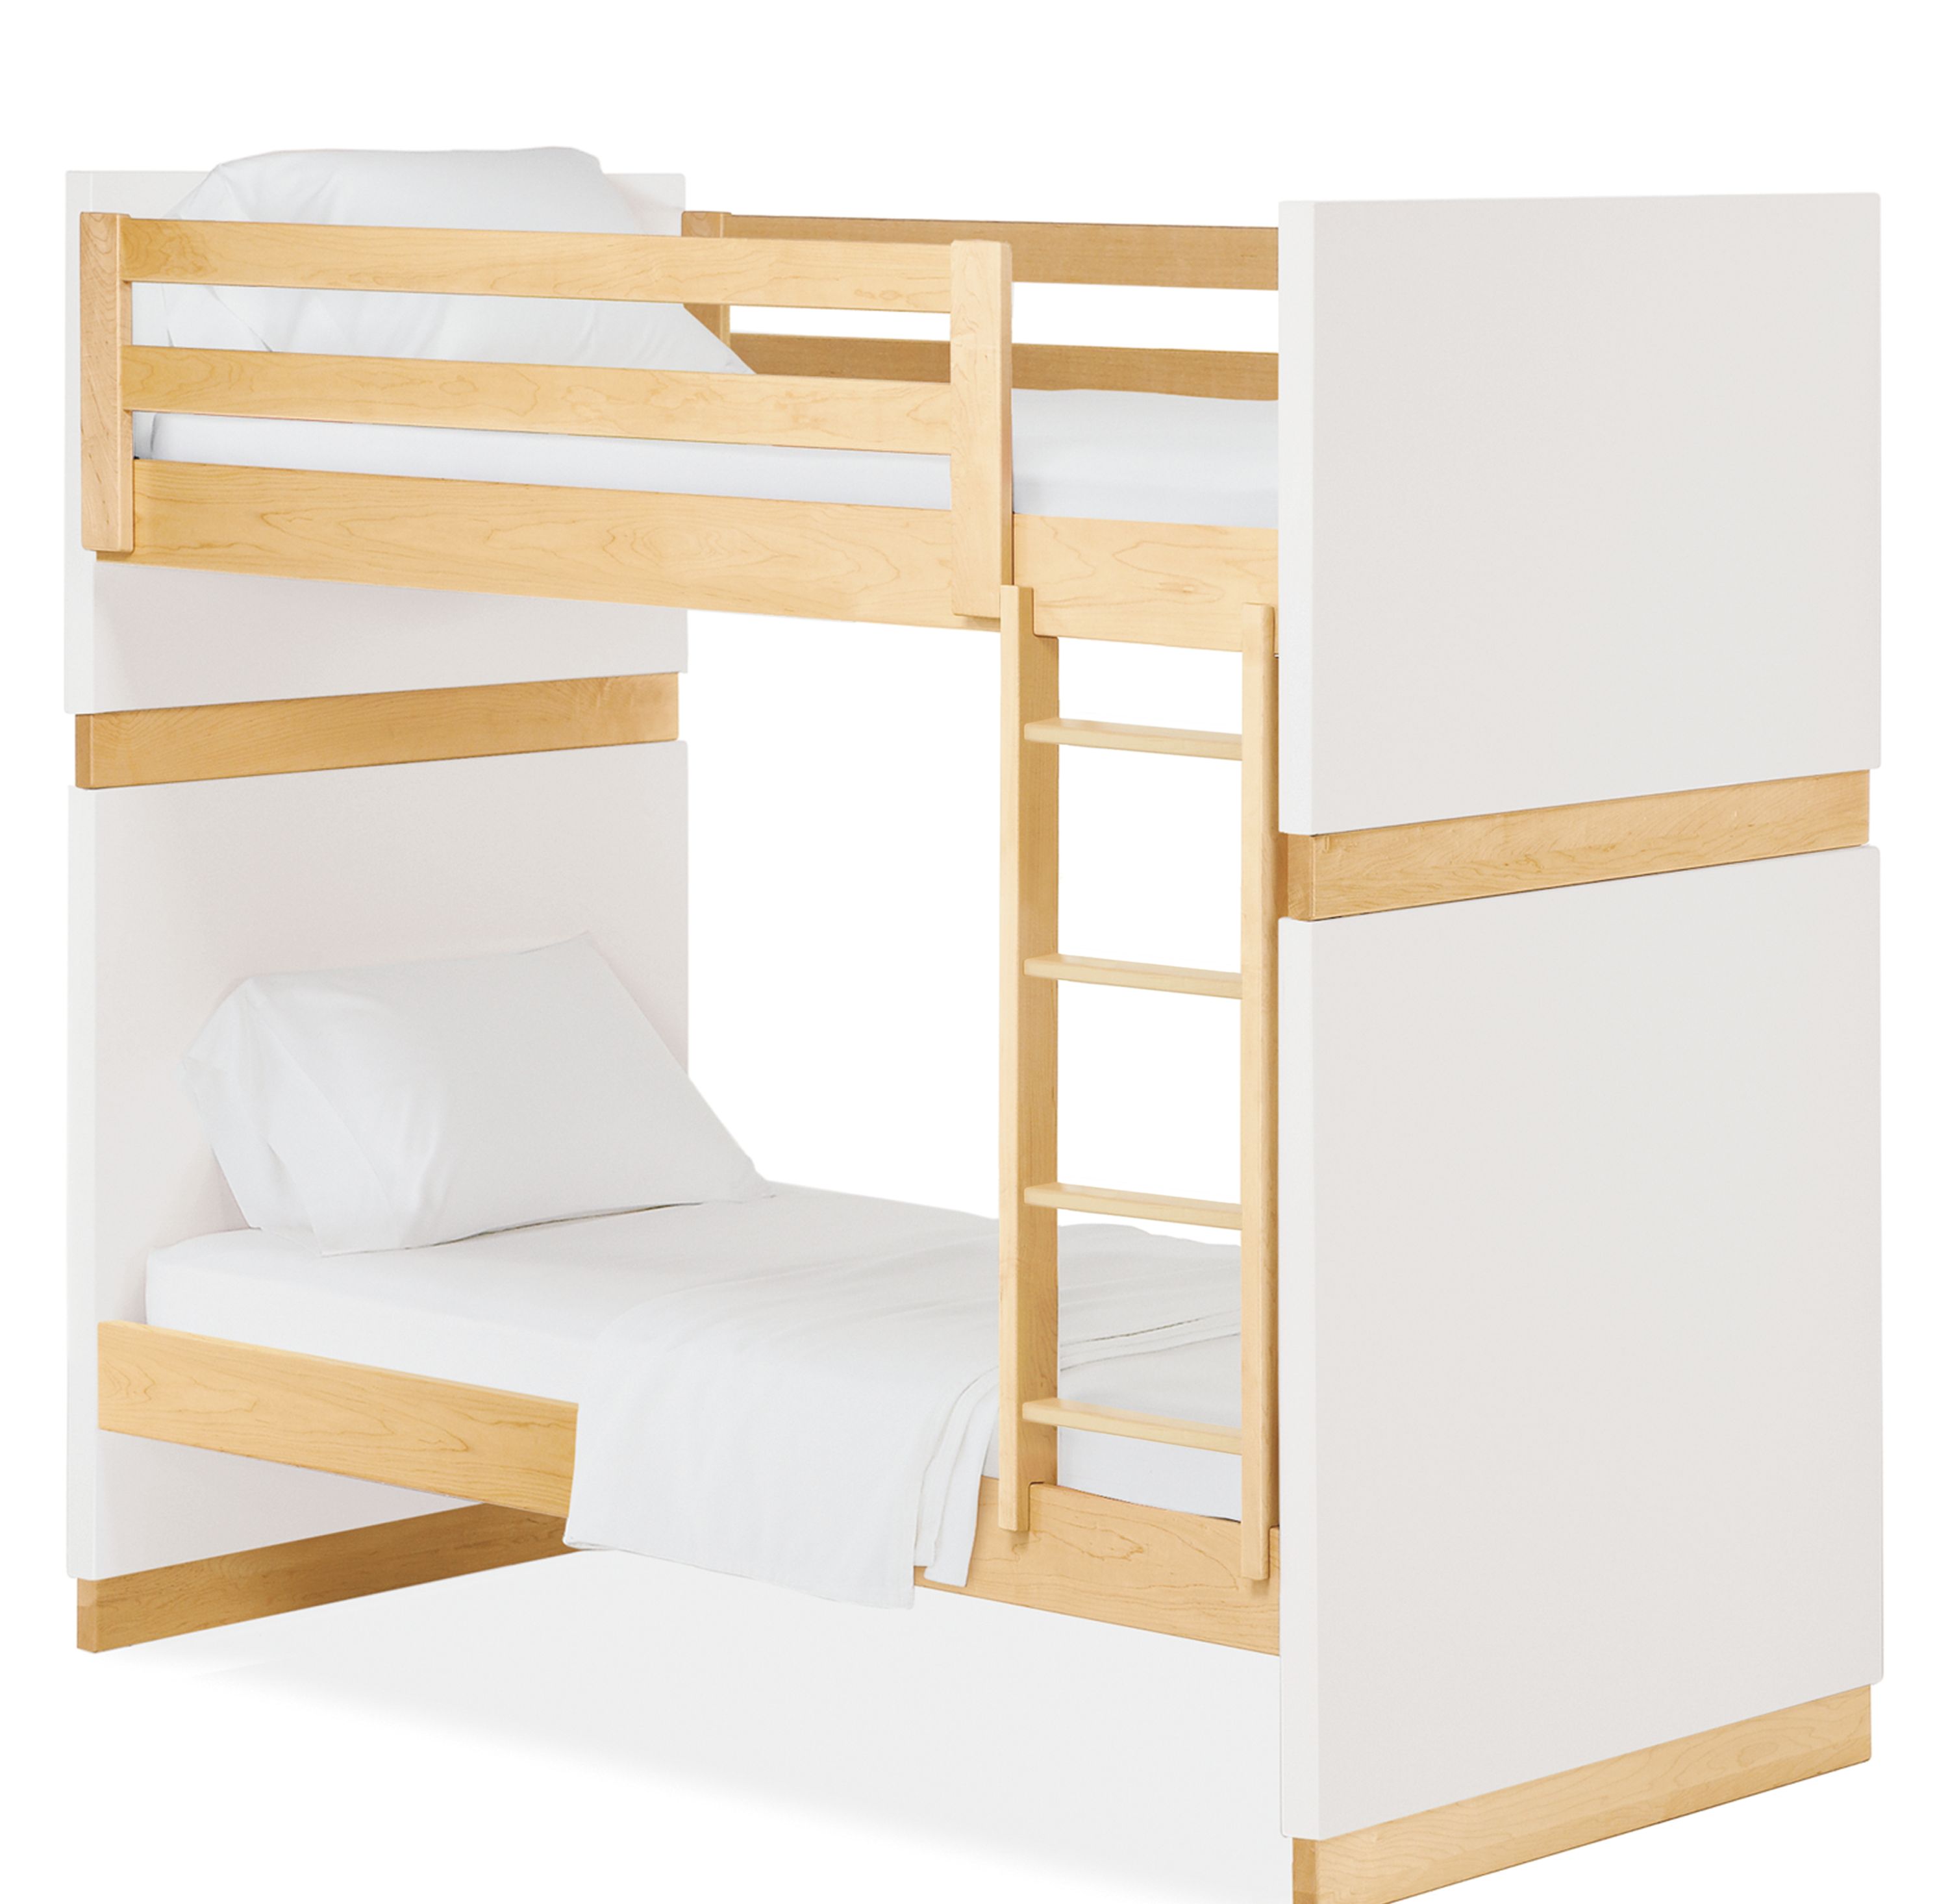 Moda Bunk Beds Twin Over, Bunk Beds Without Ladders